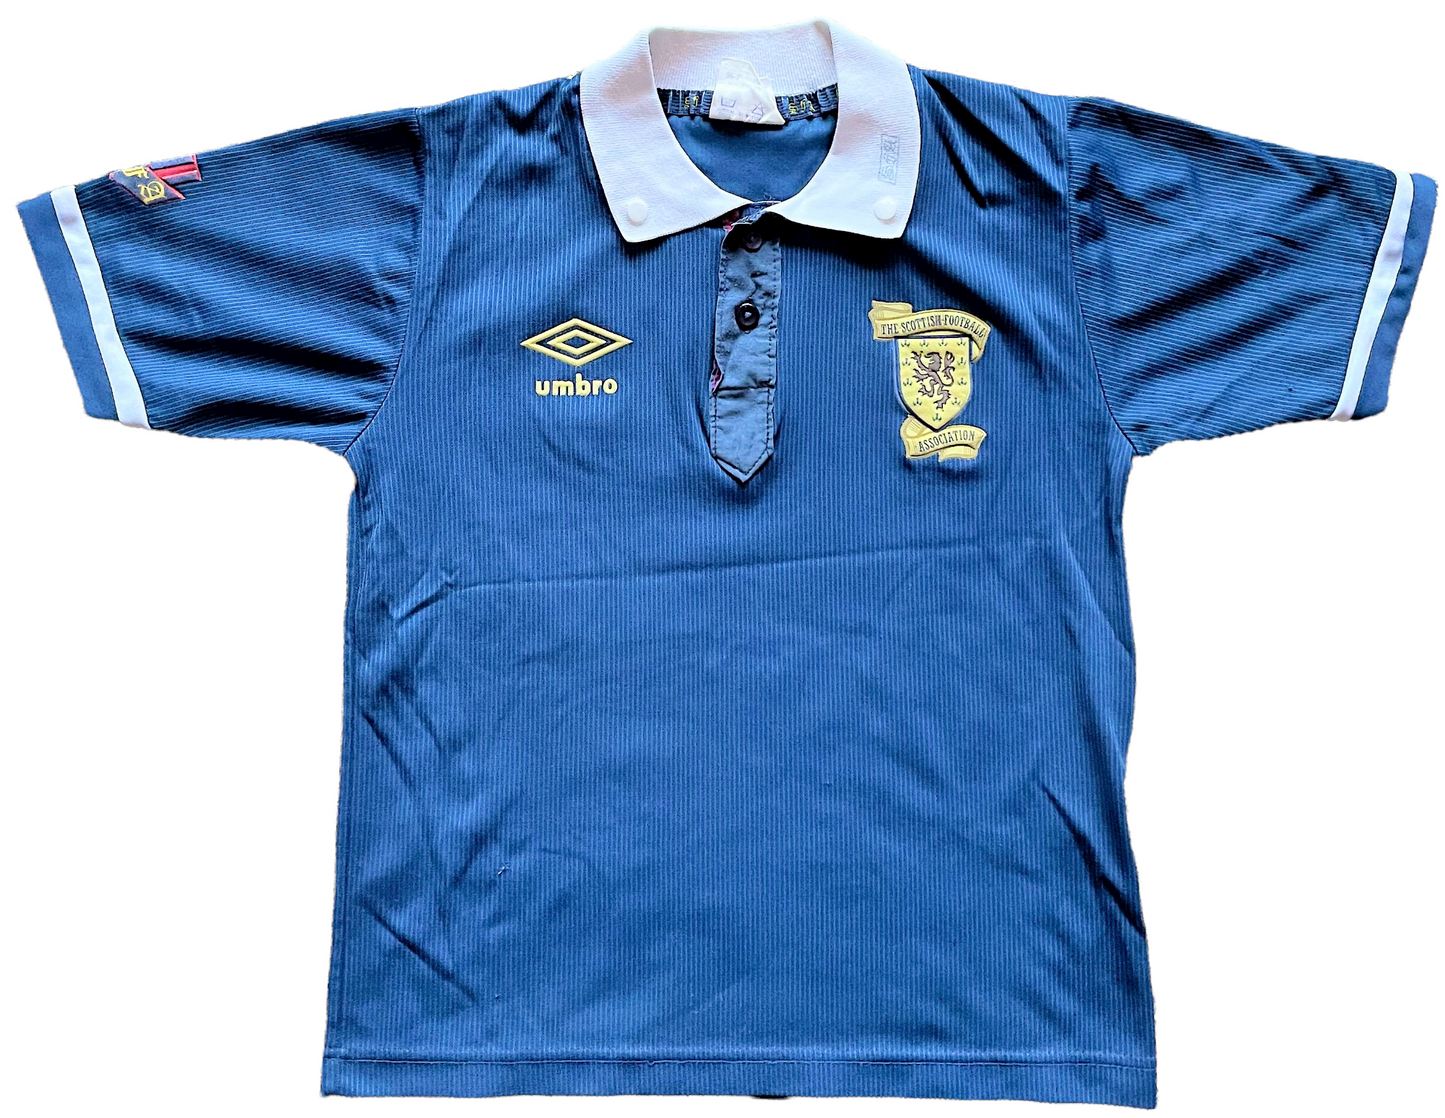 Scotland Home Kit 1988/91 (good) Childs 26-28. Height 16 inches